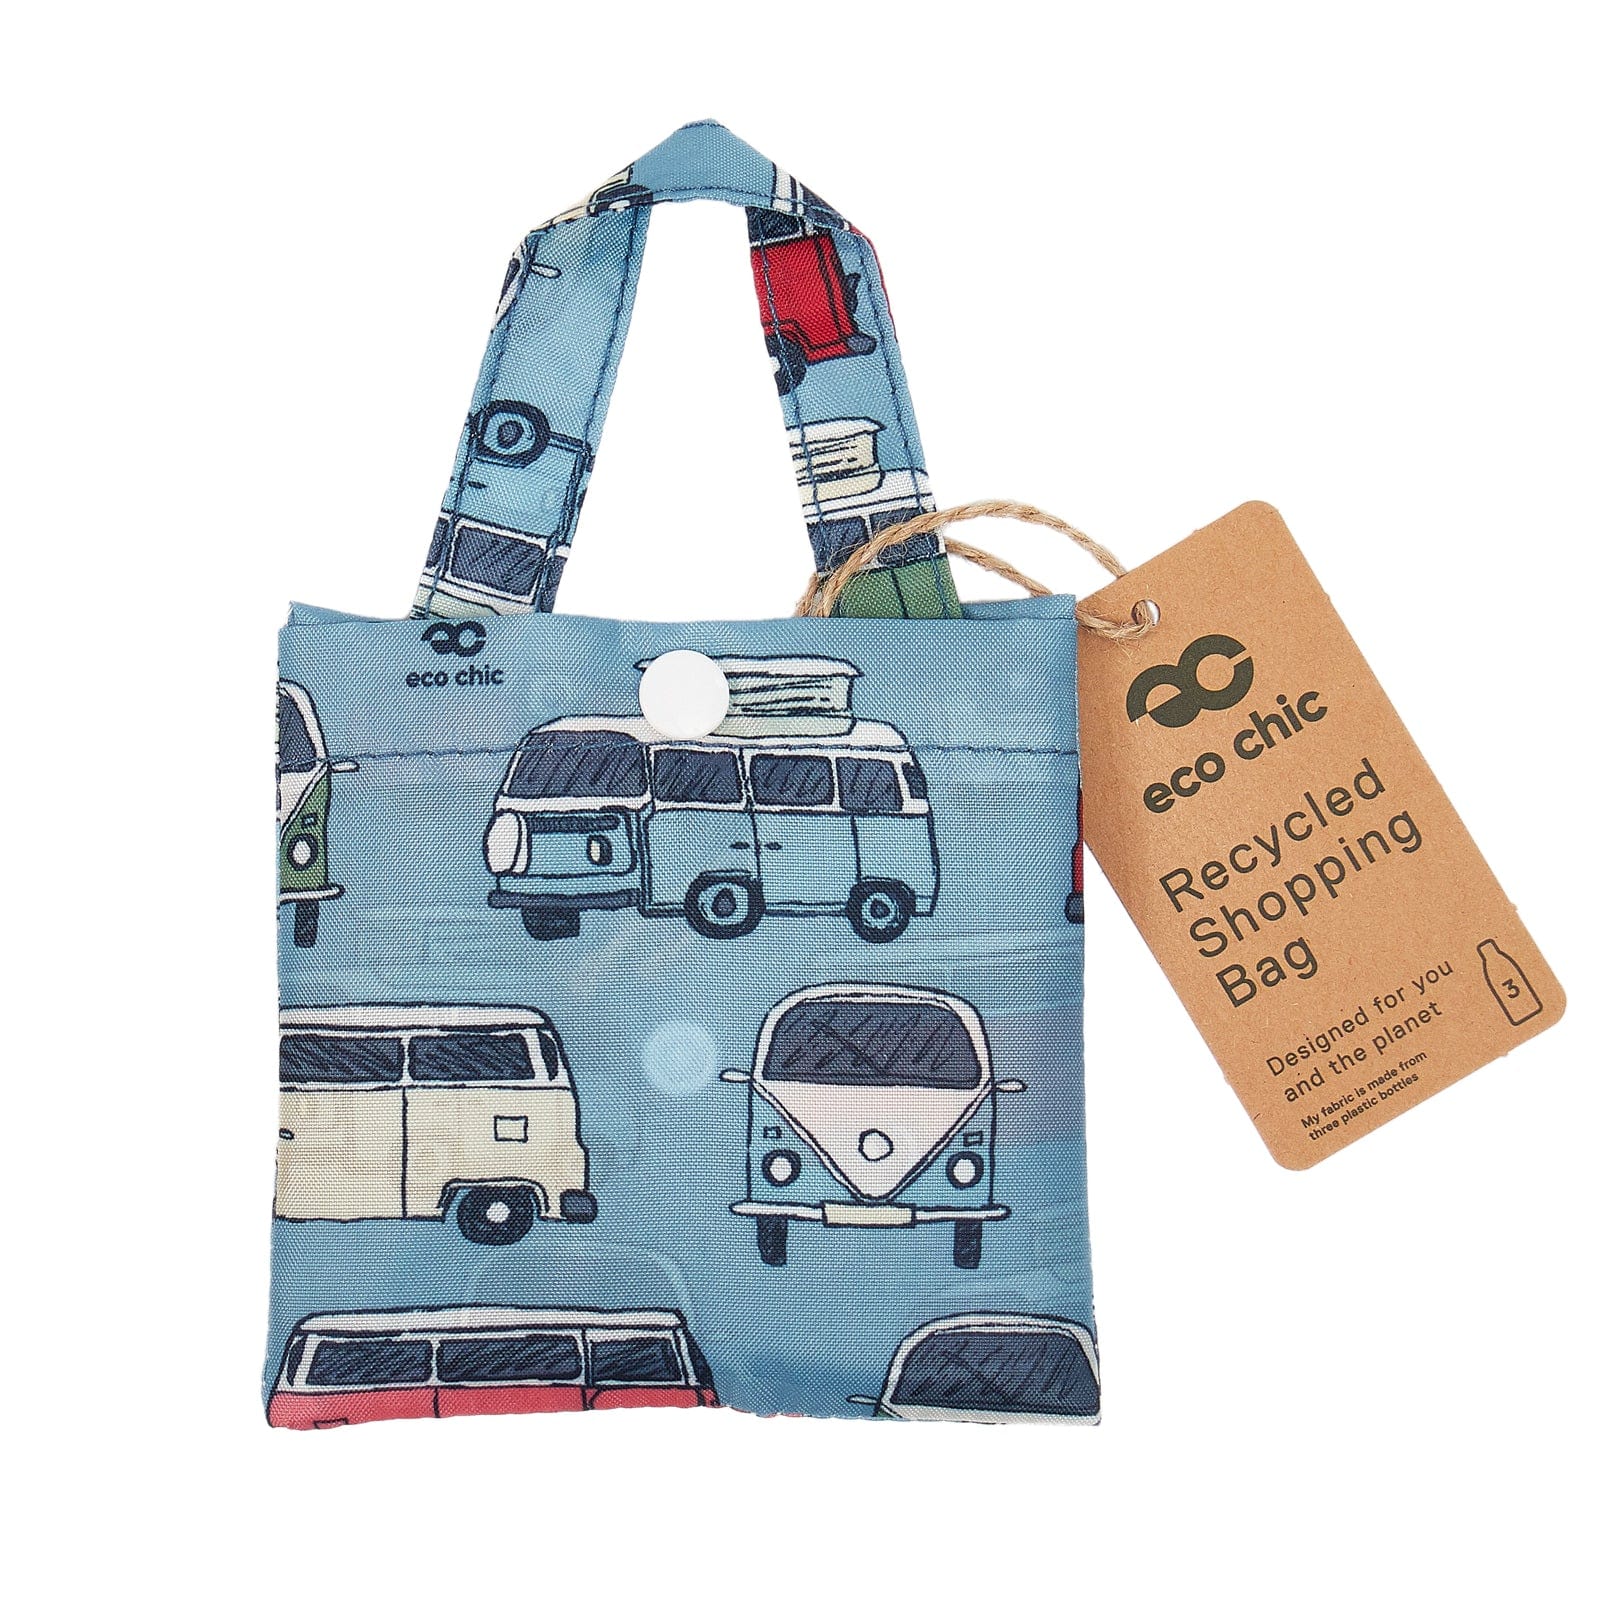 Eco Chic Eco Chic Lightweight Foldable Reusable Shopping Bag Campervan